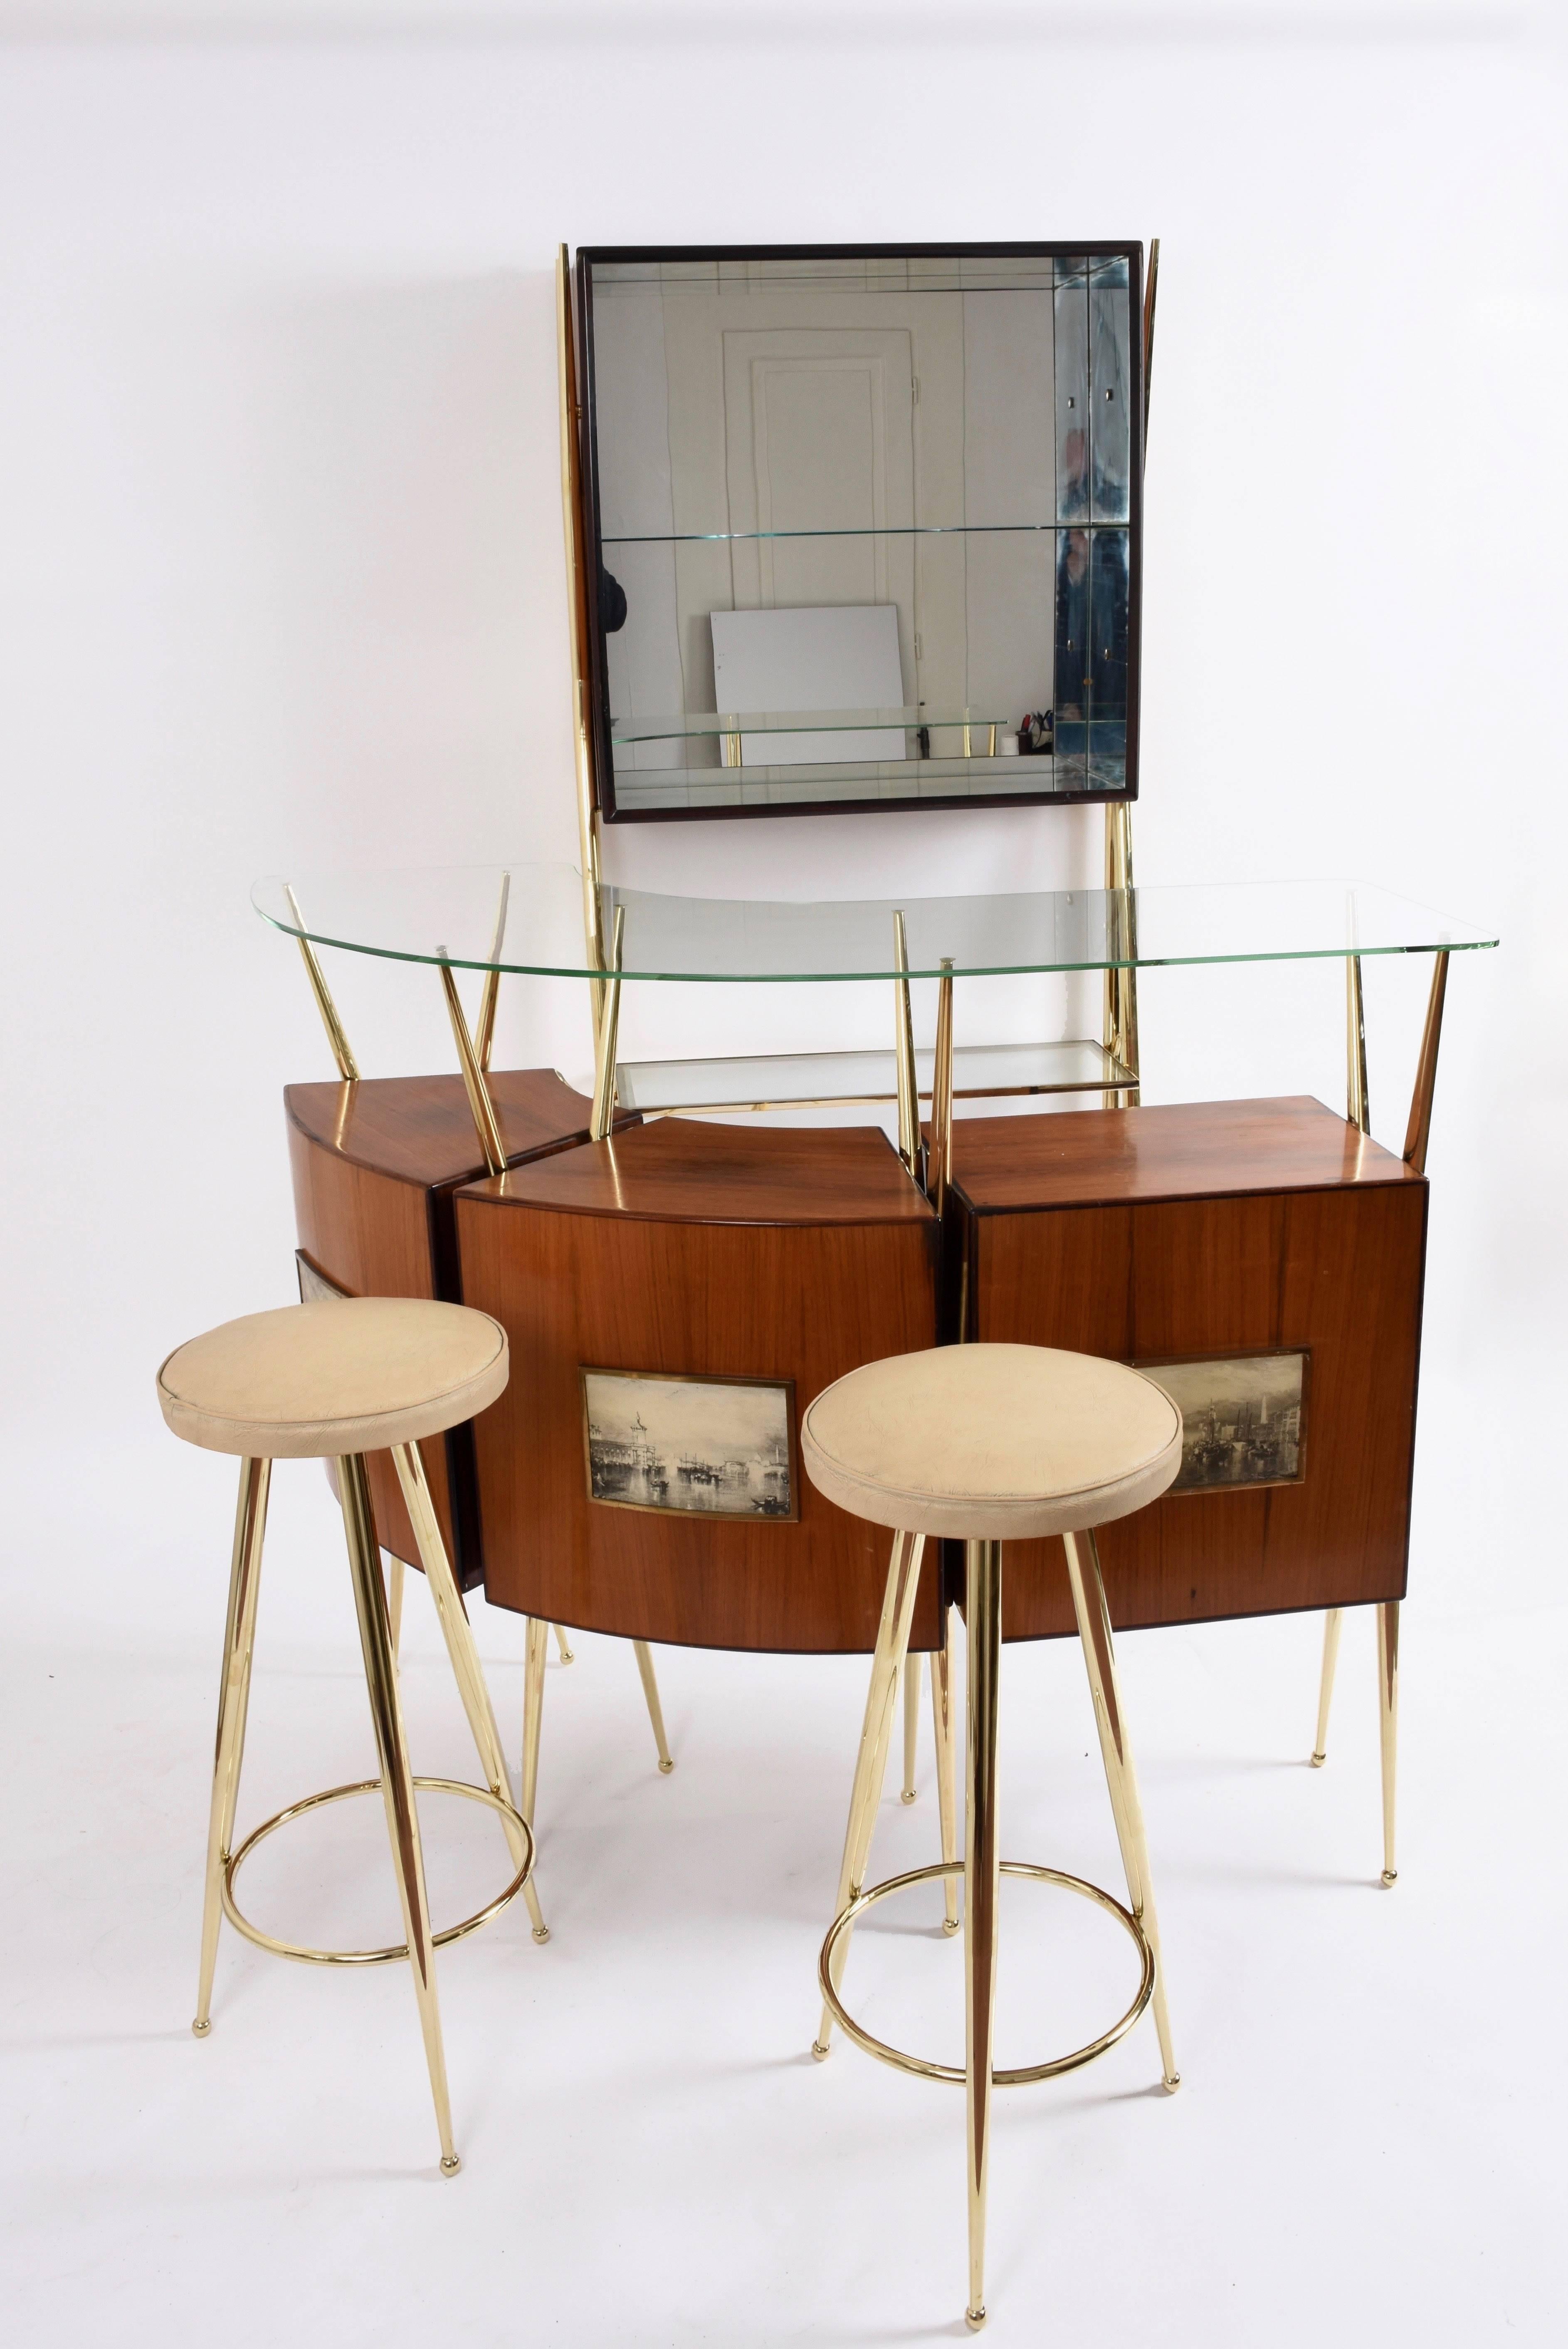 A unique piece for prestigious suites and homes - Complete bar designed by Gio Ponti in the 1950s
This complete bar cabinet consists of one high wall-console, one curved serving cabinet, and two brass stools with original white moleskin seats. The